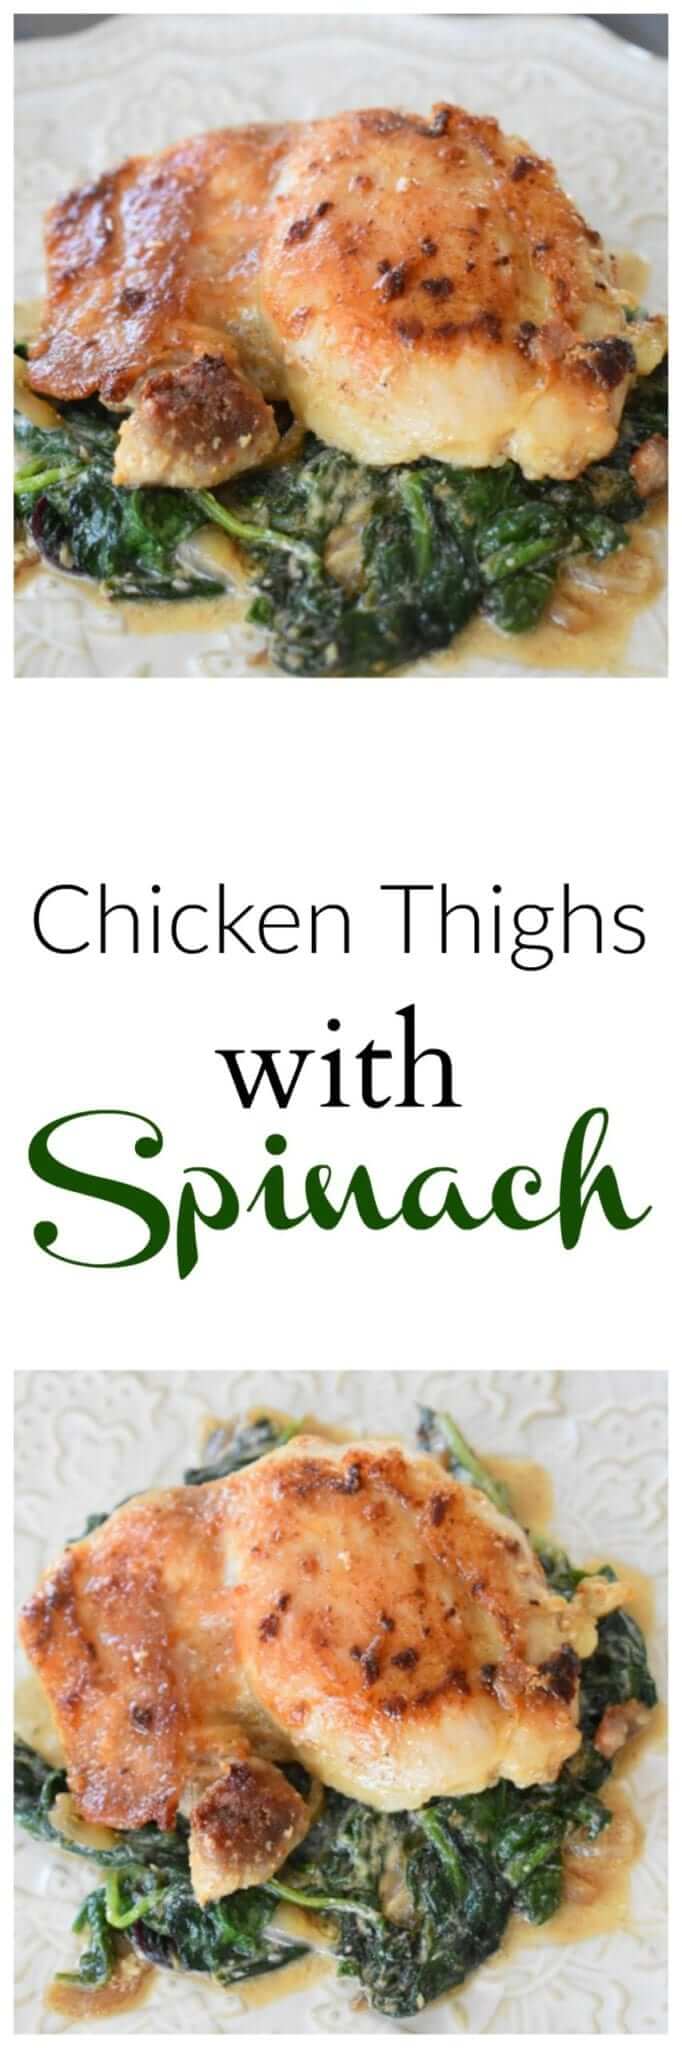 Chicken thighs with spinach